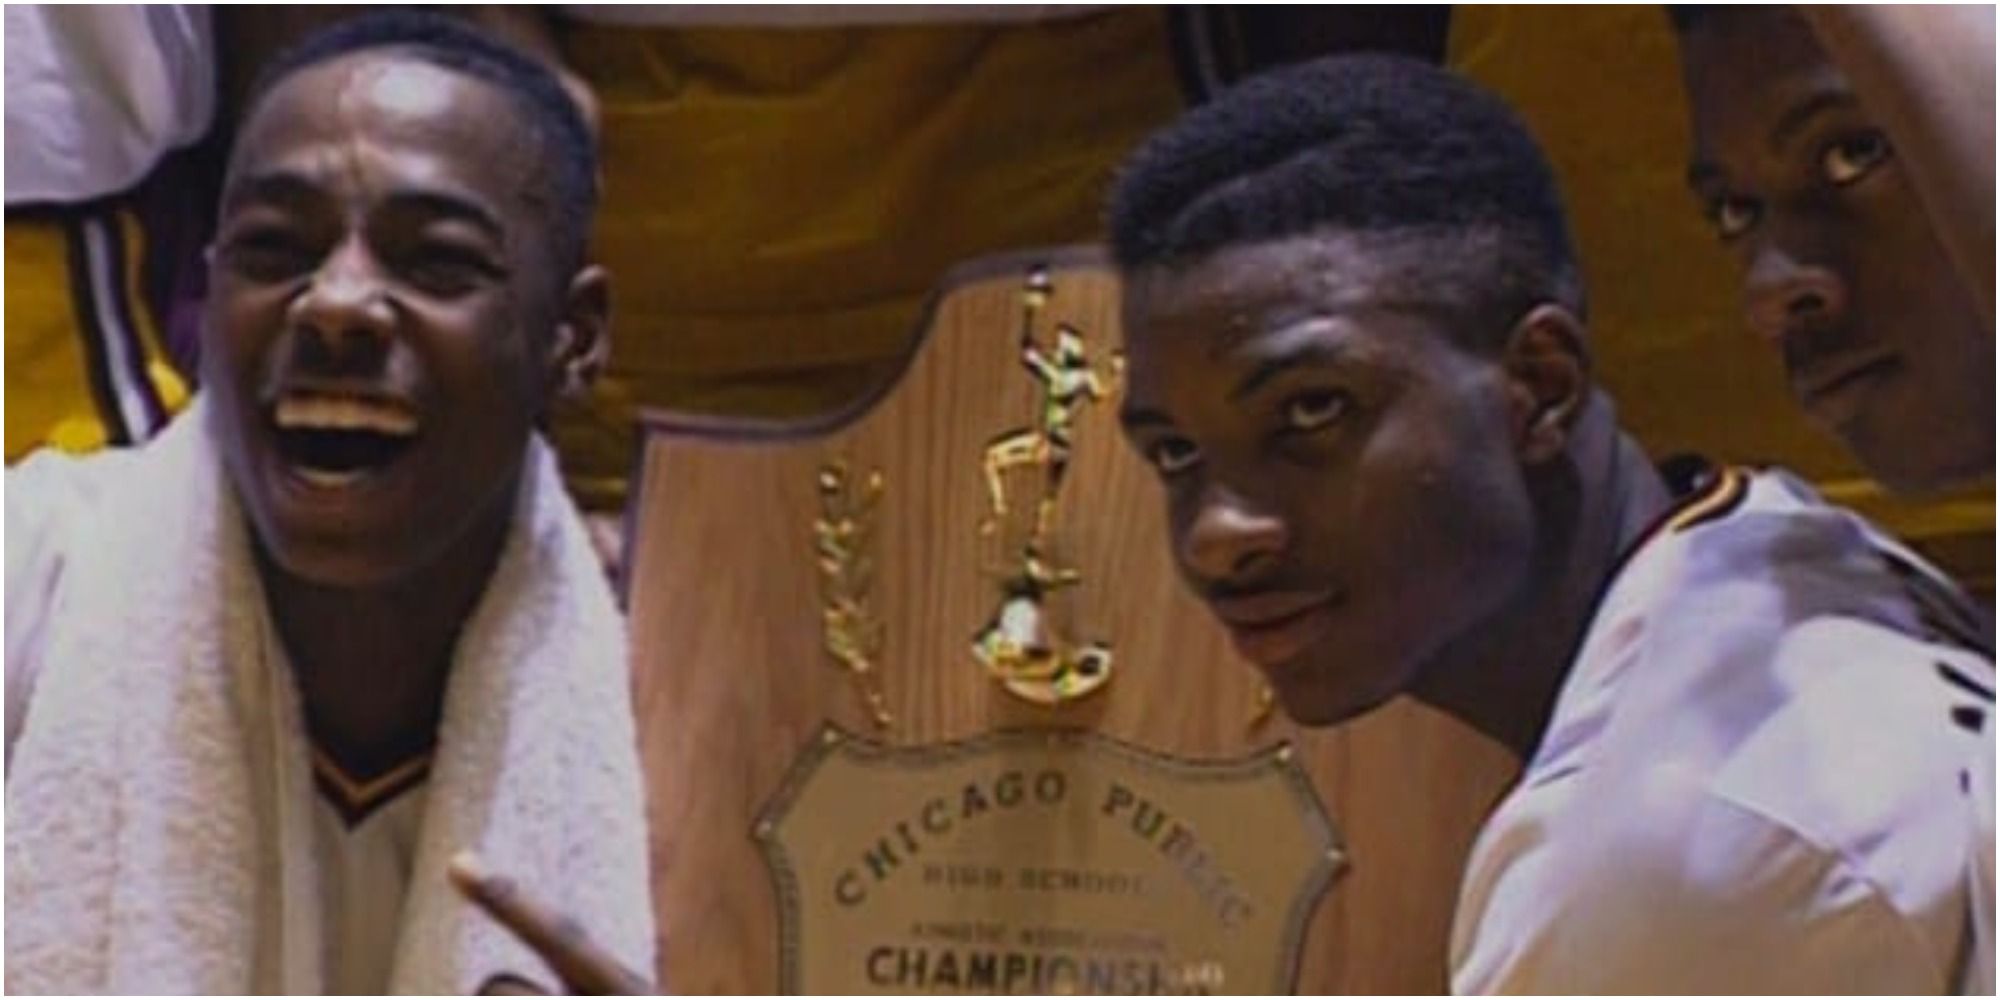 A screenshot of William Gates and Arthur Agee from Hoop Dreams